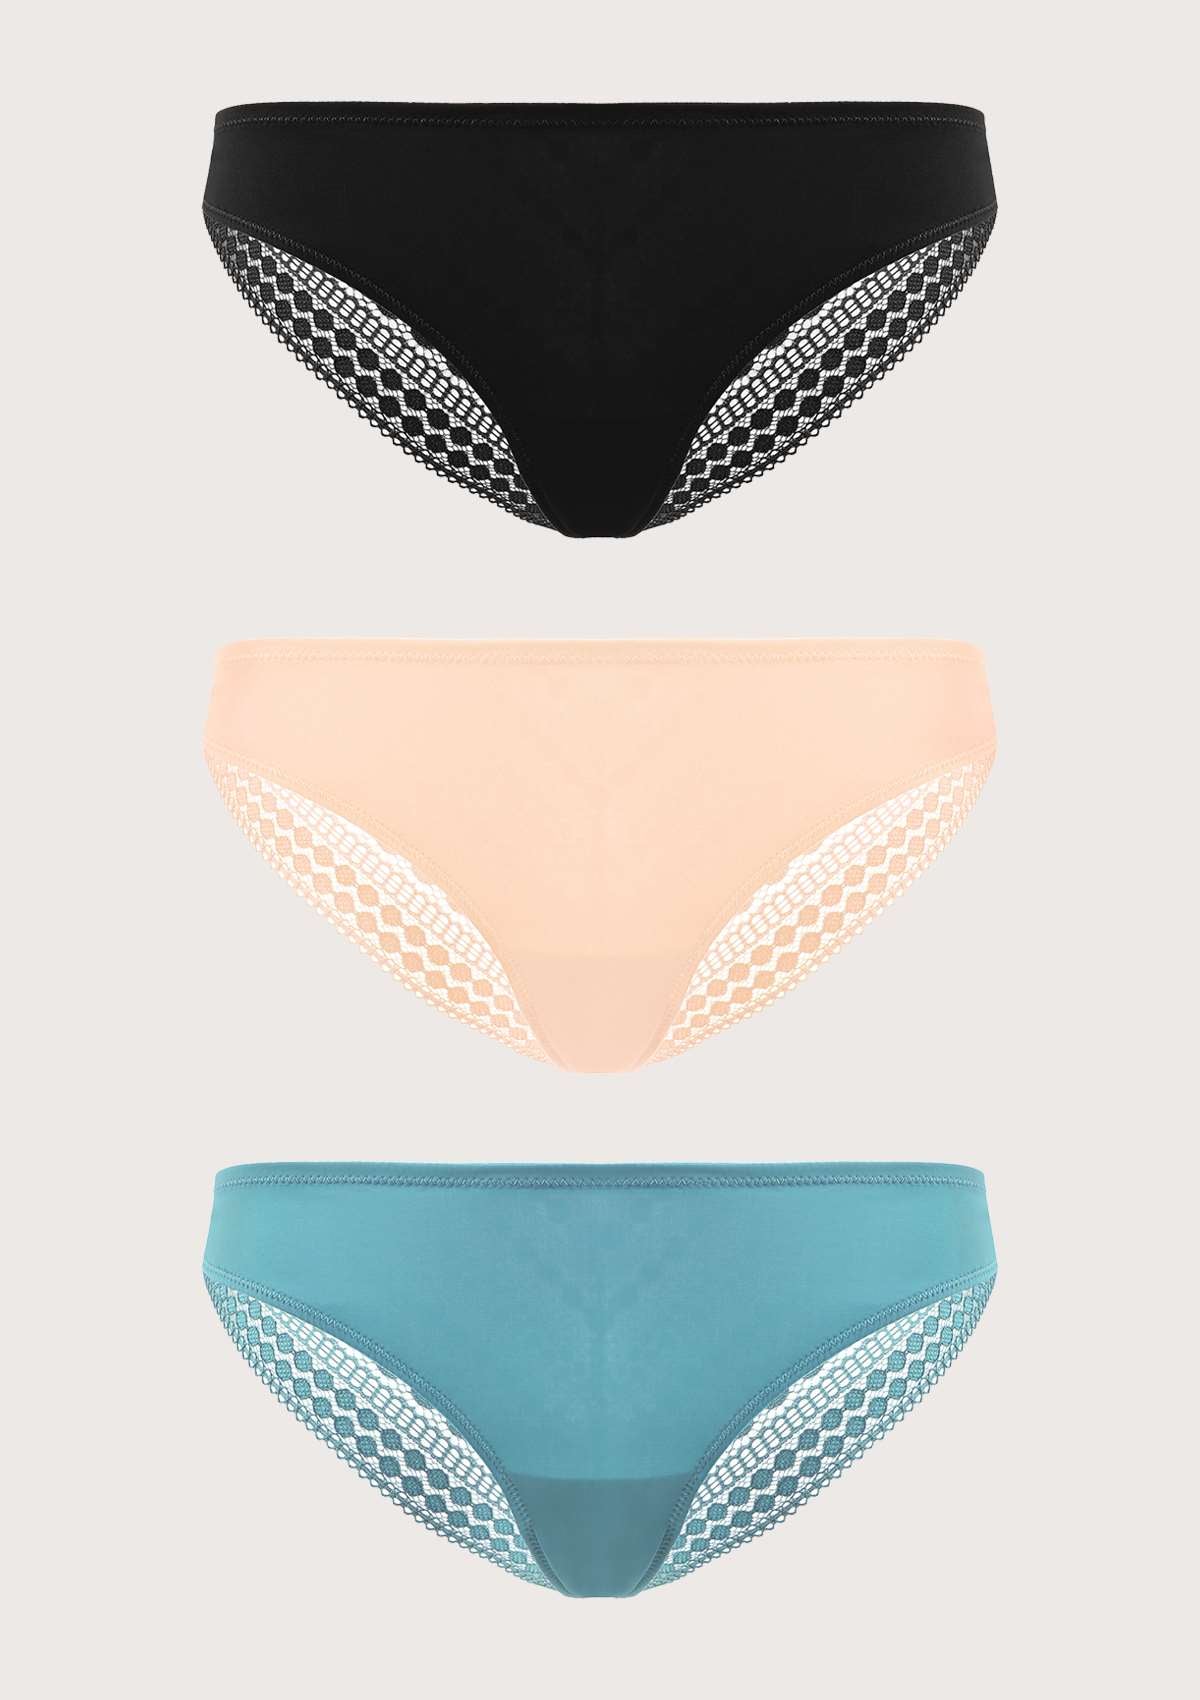 HSIA Polka Dot Super Soft Lace Back Cheeky Panties 3 Pack - L / Black+Frosty Green+Pink